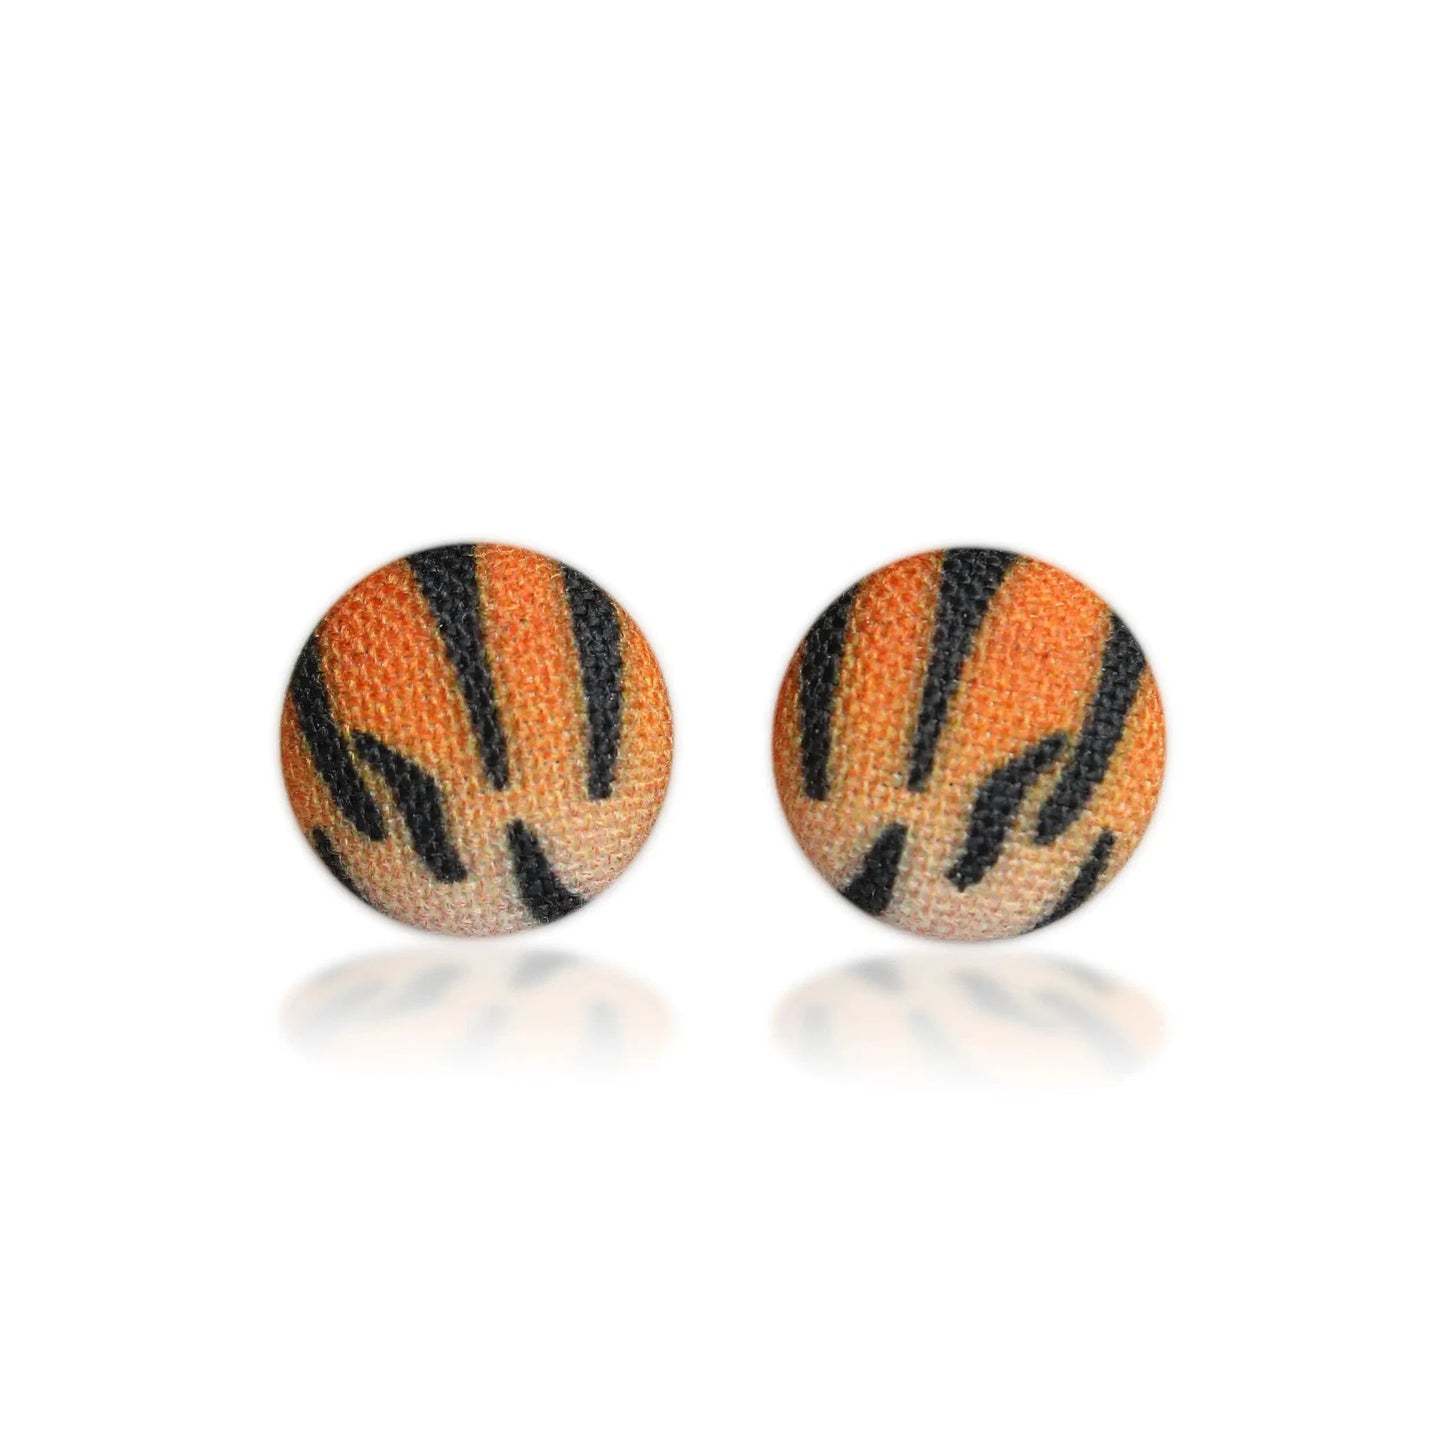 Tiger Stripes Fabric Button Earrings | Handmade in the US